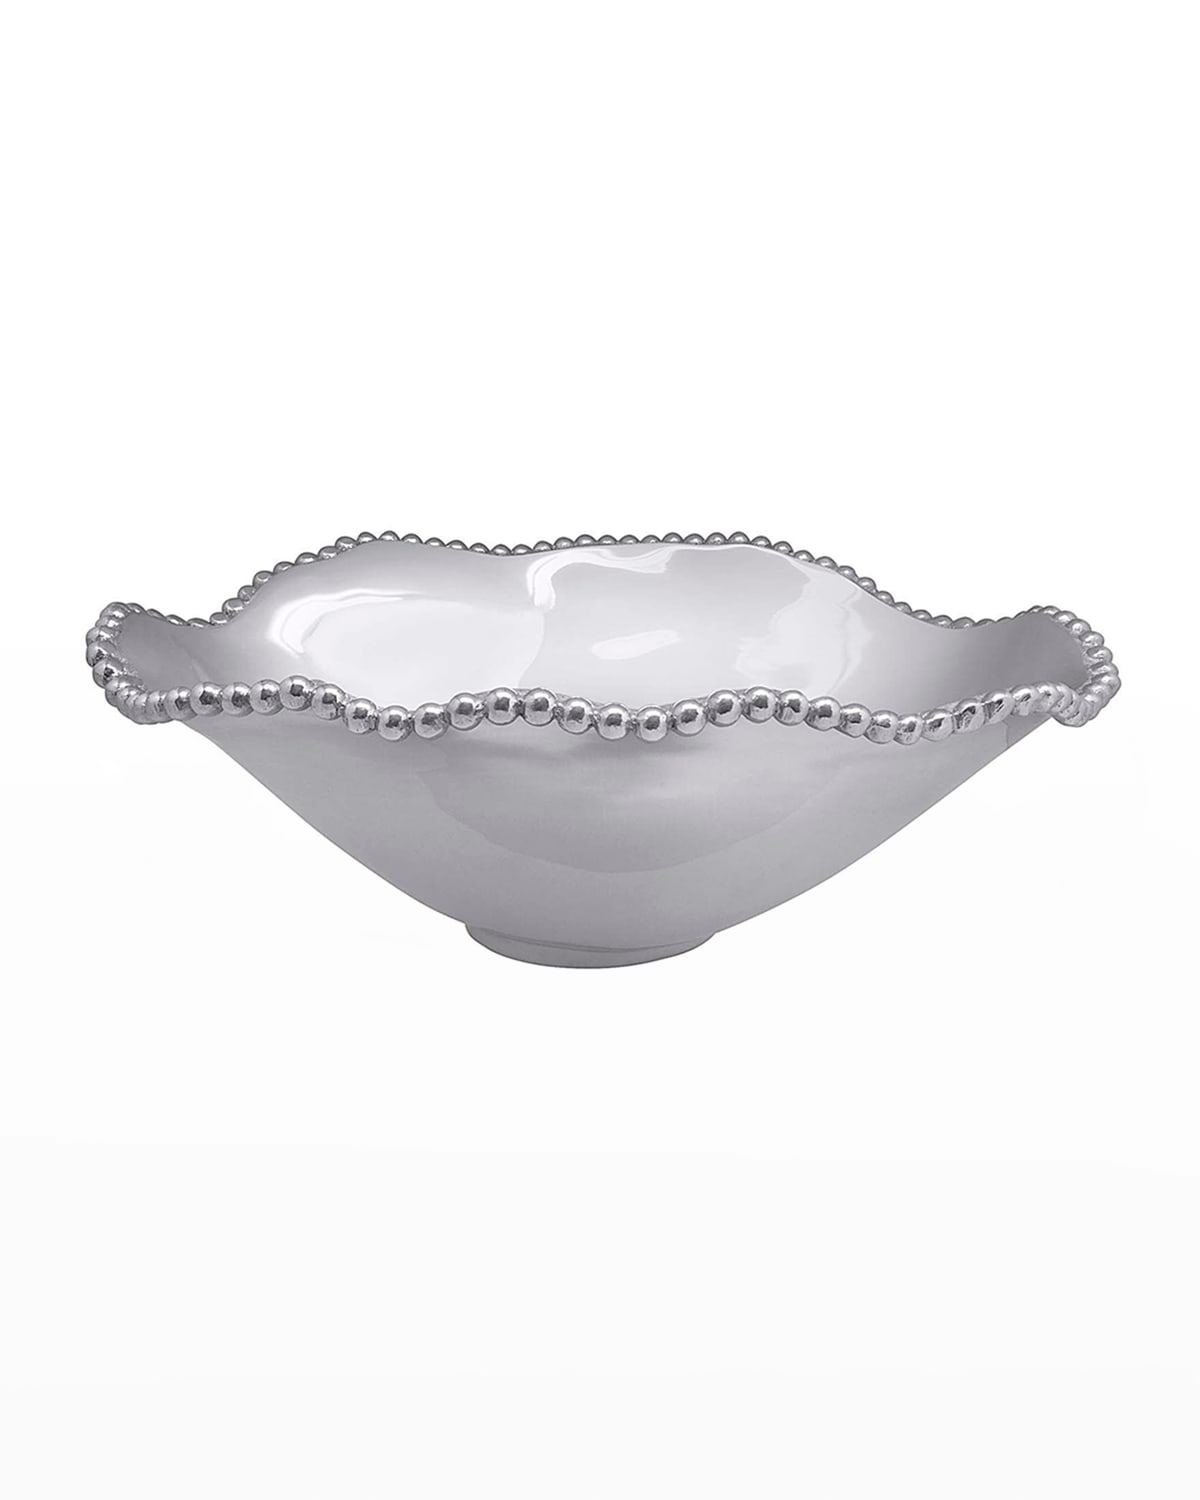 Pearled Oval Wavy Serving Bowl